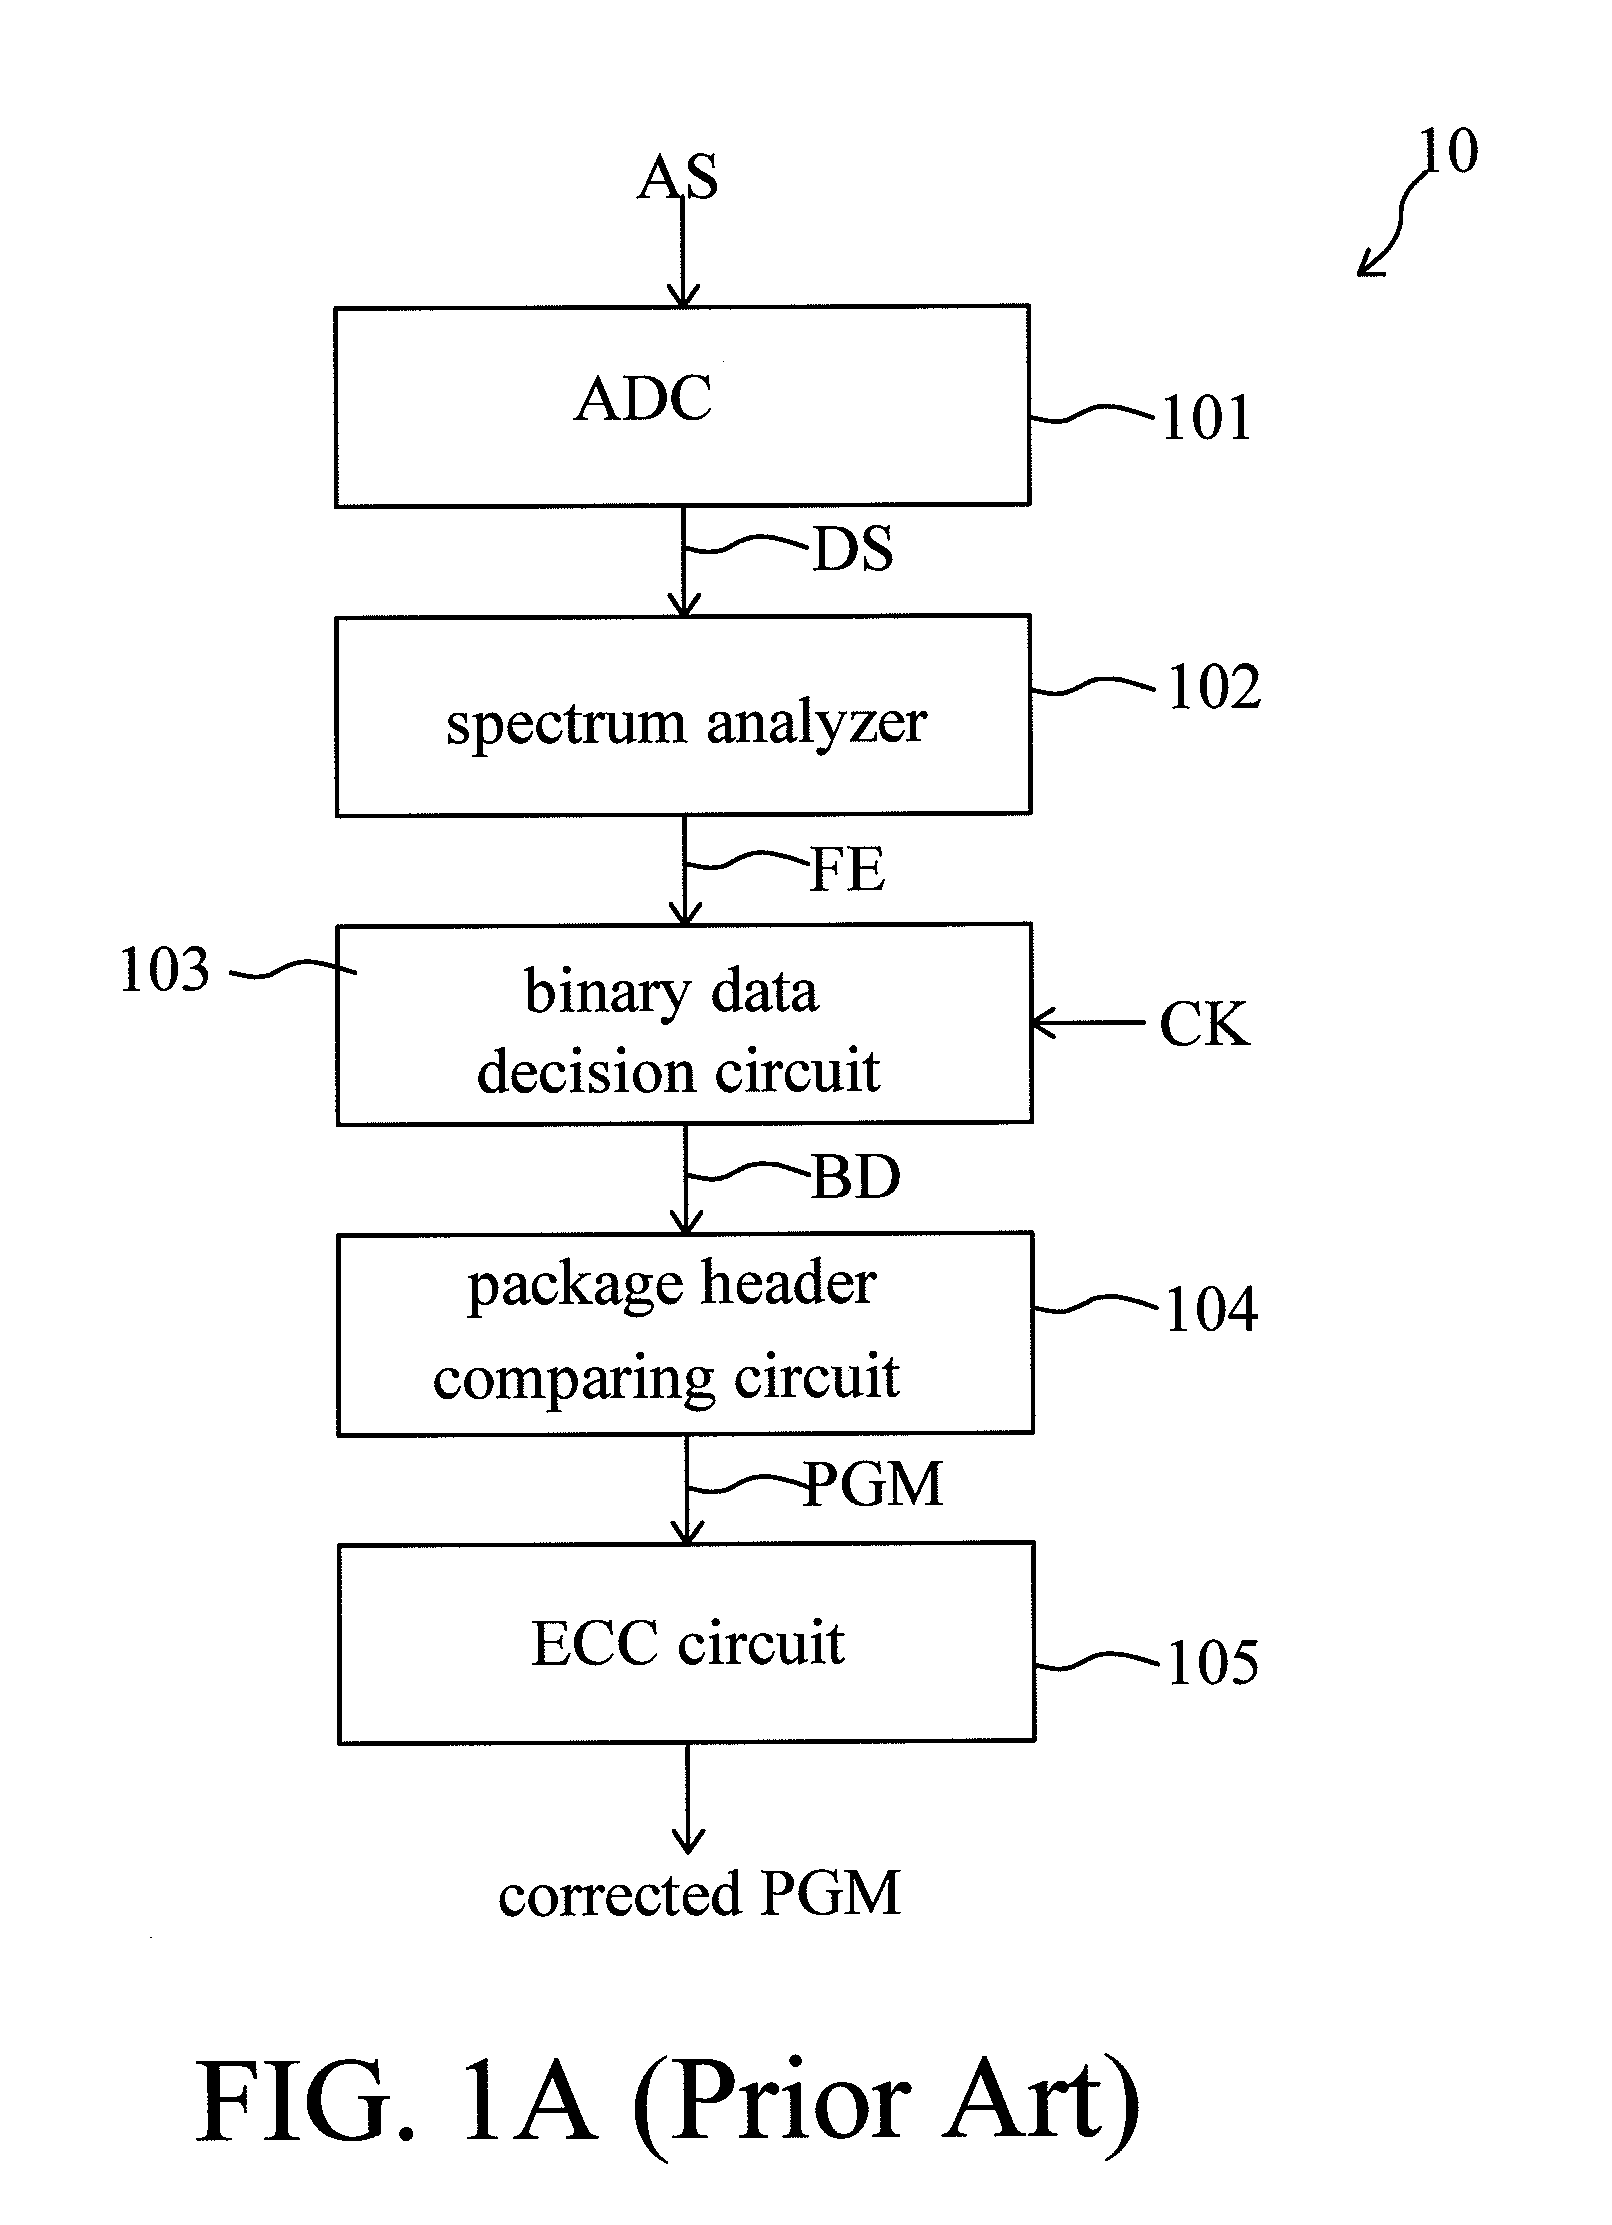 Methods and apparatuses for adaptive clock reconstruction and decoding in audio frequency communication